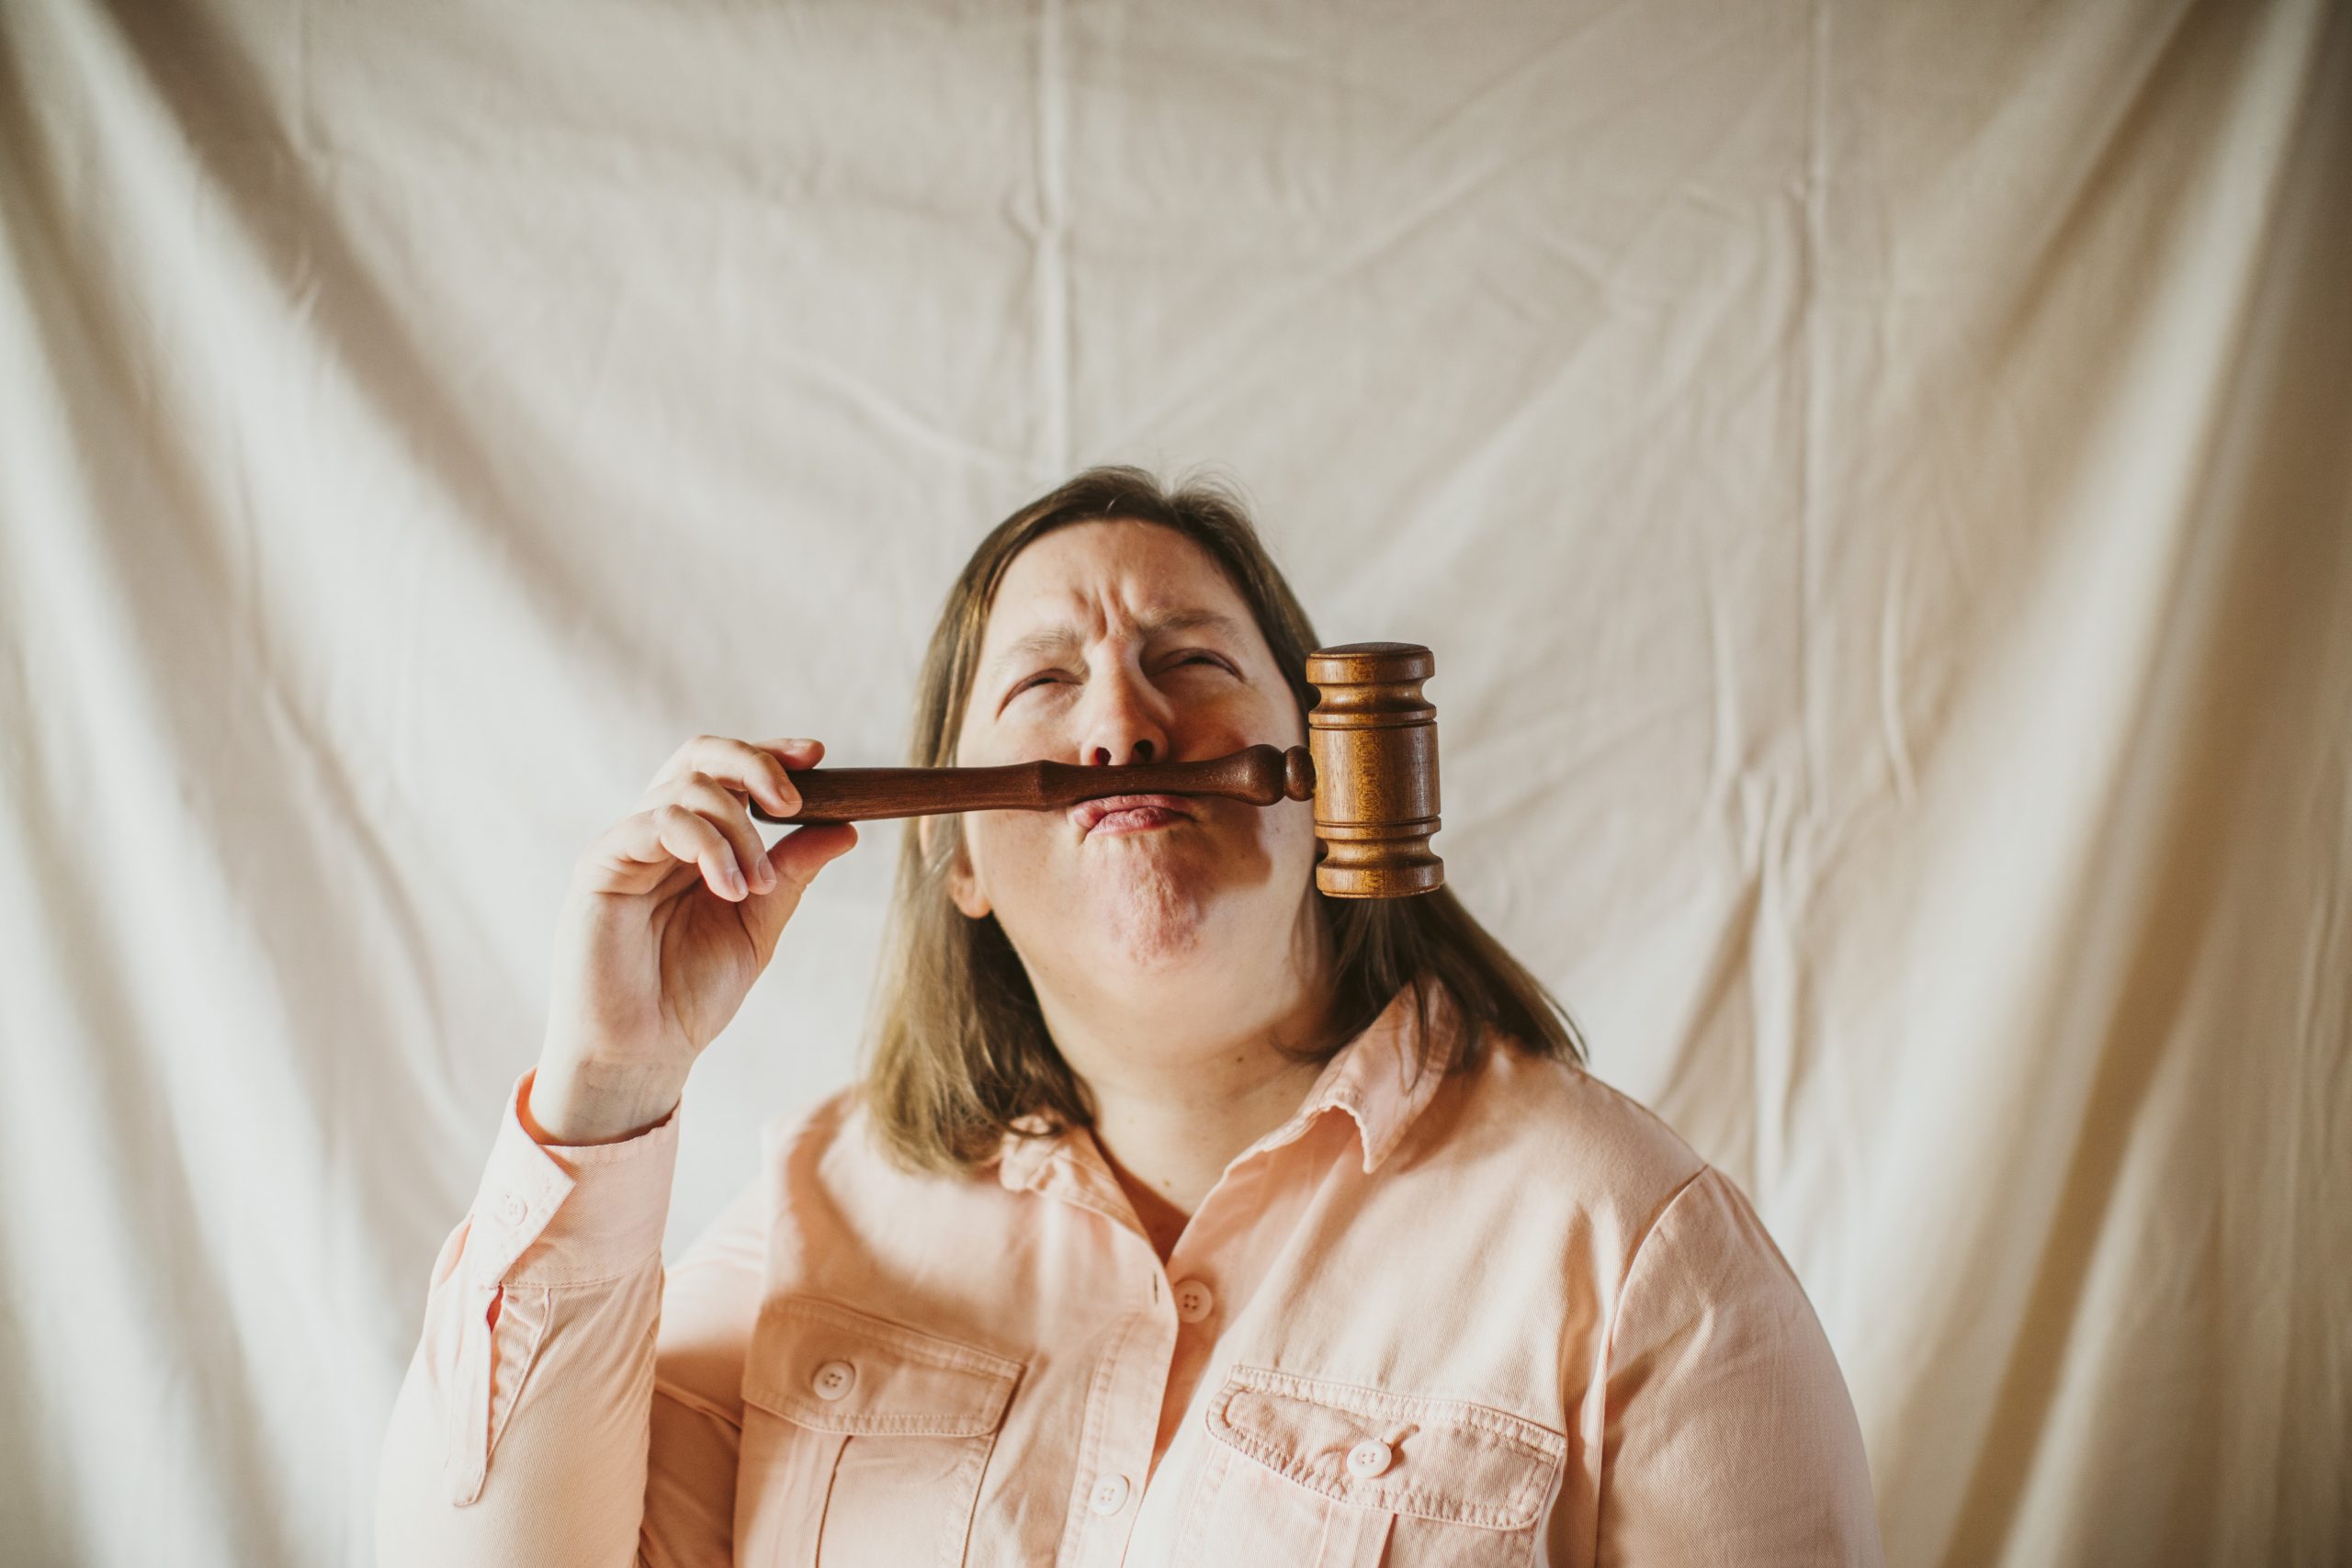 Online Legal Essentials Founder Corinne Boudreau with Gavel Moustache